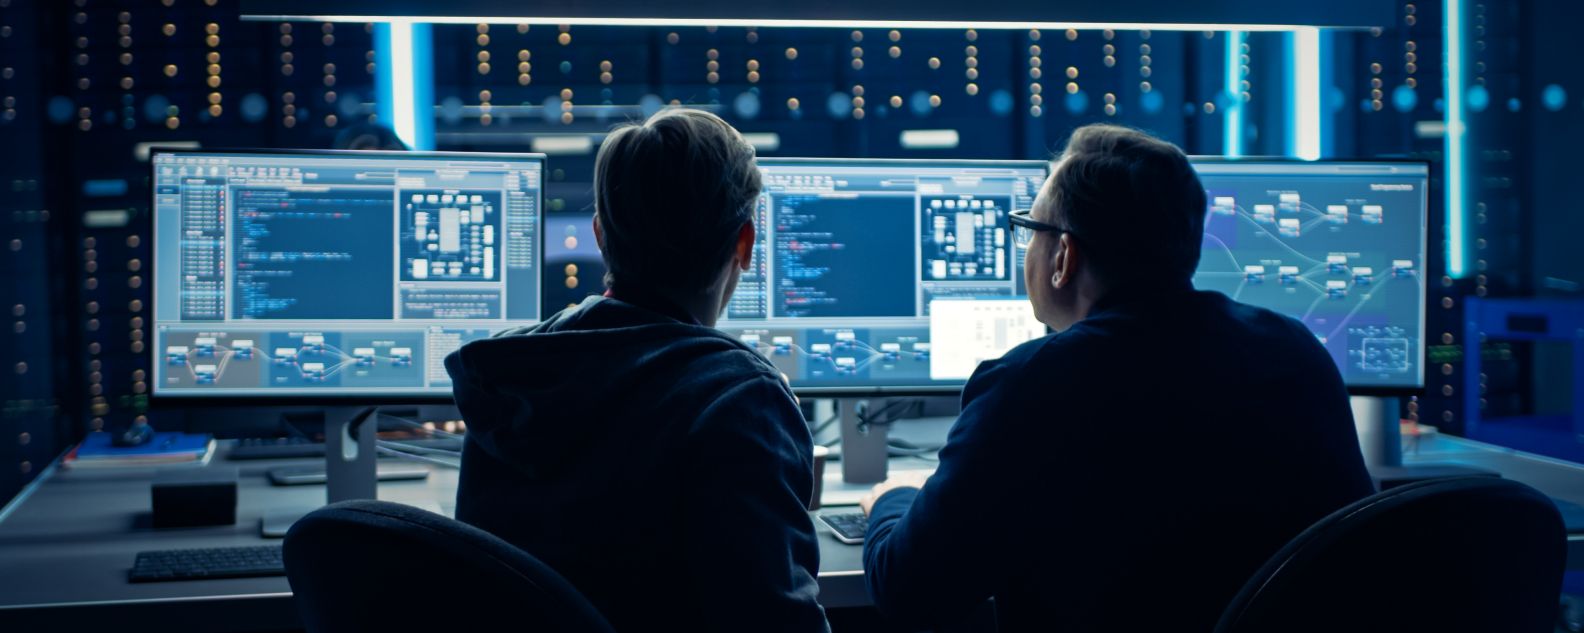 Two Professional IT Programers Discussing Blockchain Data Network Architecture Design and Development Shown on Desktop Computer Display. Working Data Center Technical Department with Server Racks